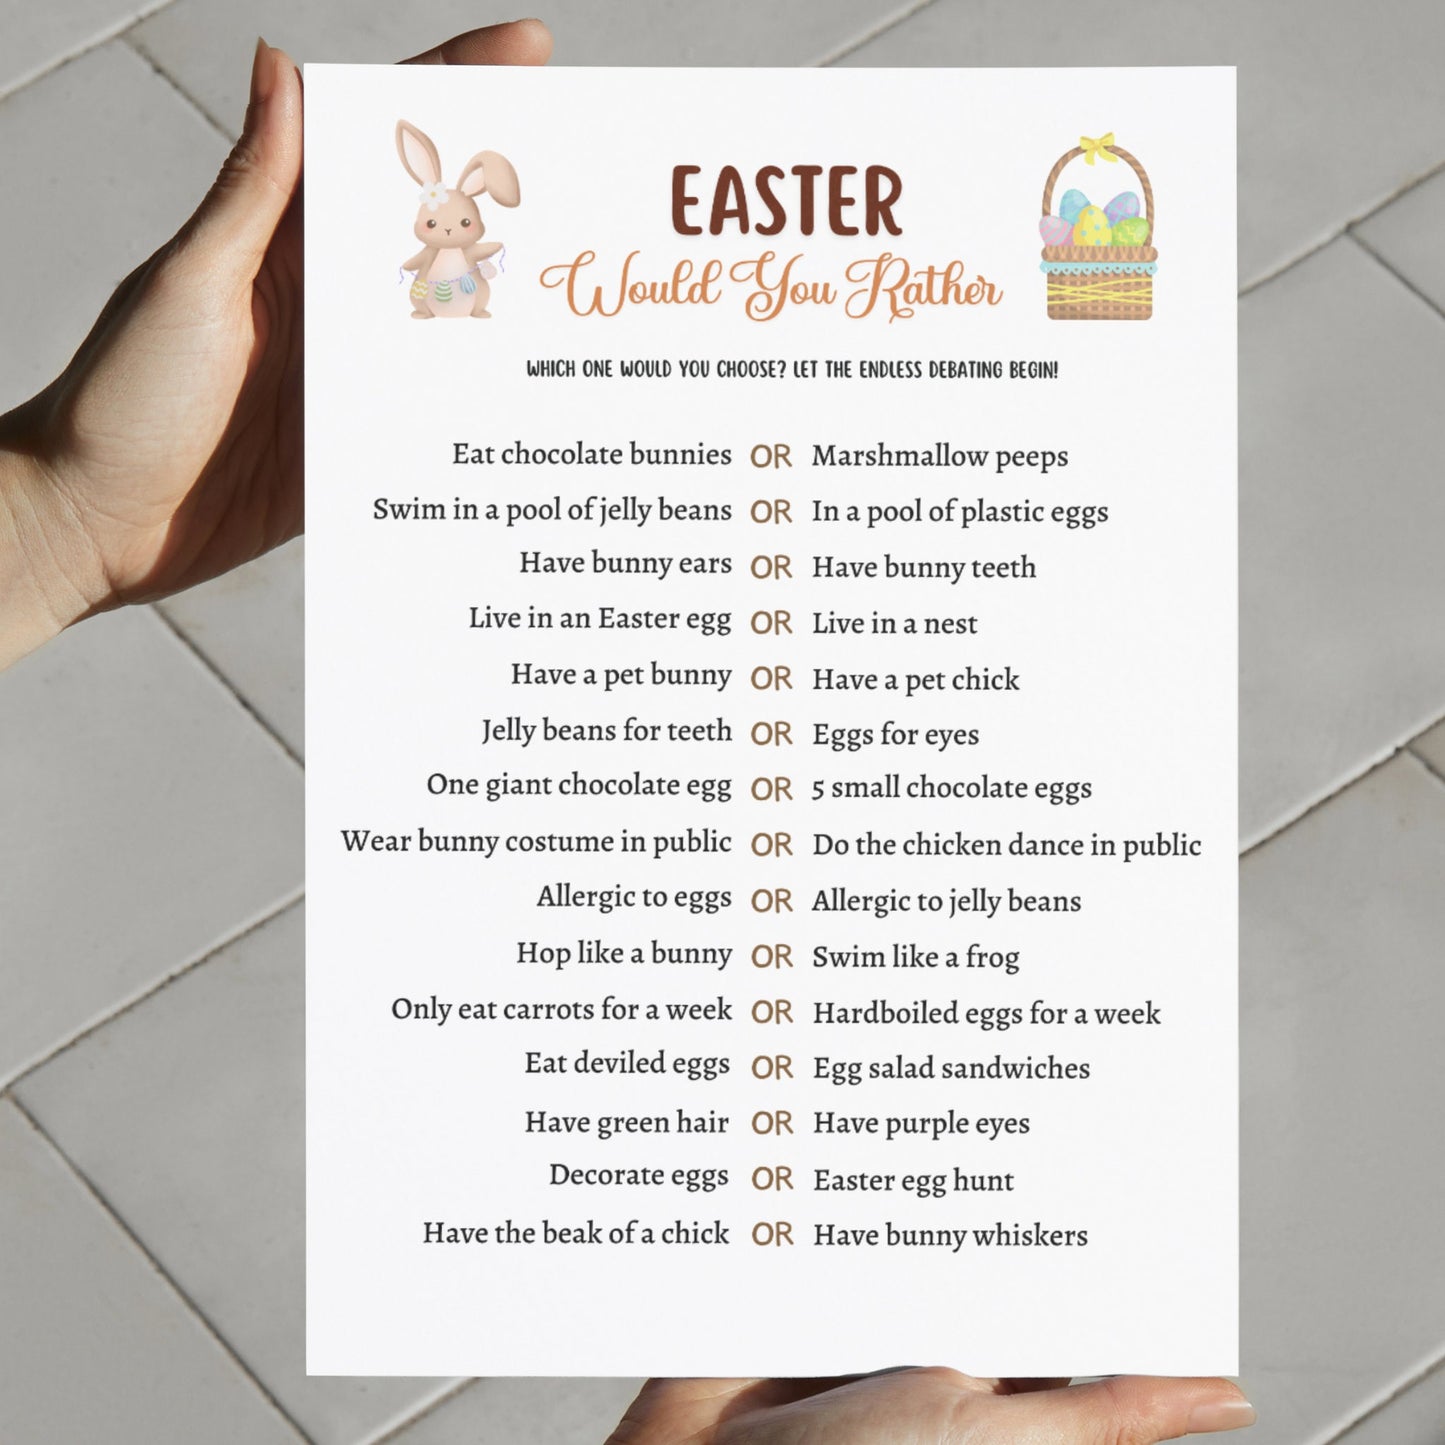 Easter Would You Rather Game Printable, This or That Easter Party Game, Kids Easter Activity, Fun Easter Dinner Game Adults, Easter Sunday